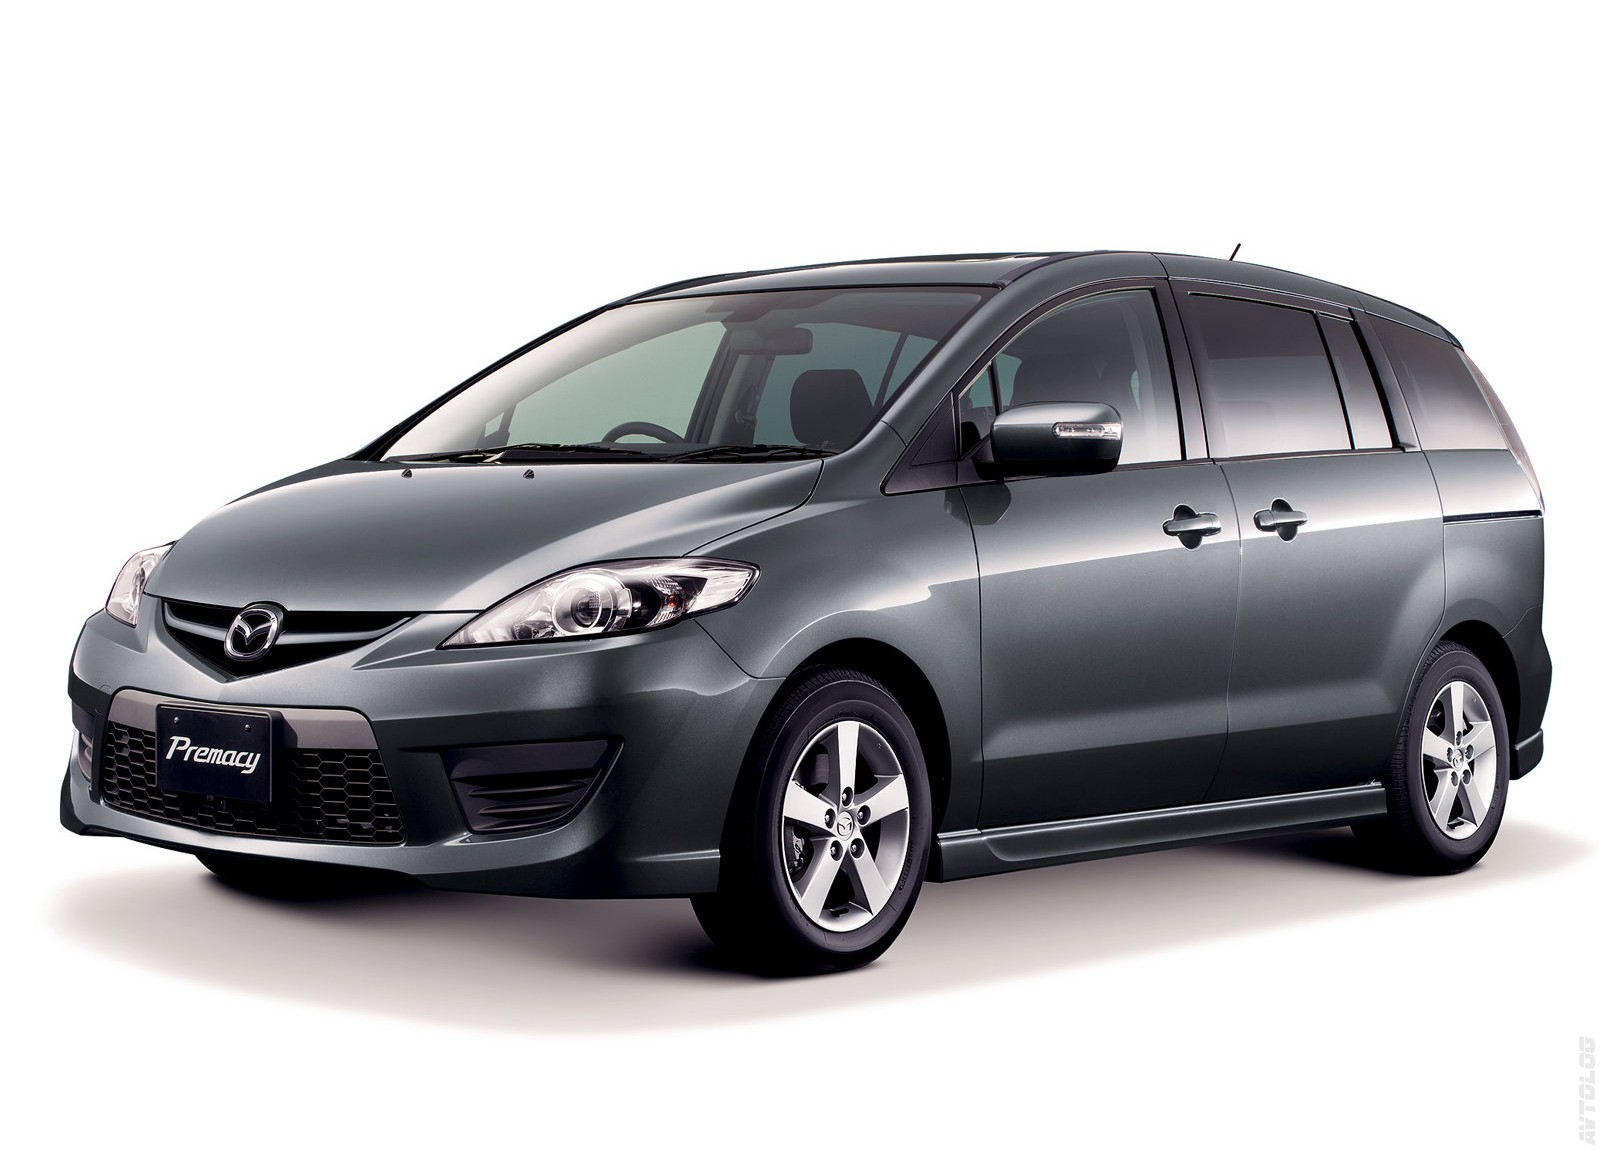 Mazda Premacy 2014 Review, Amazing Pictures and Images